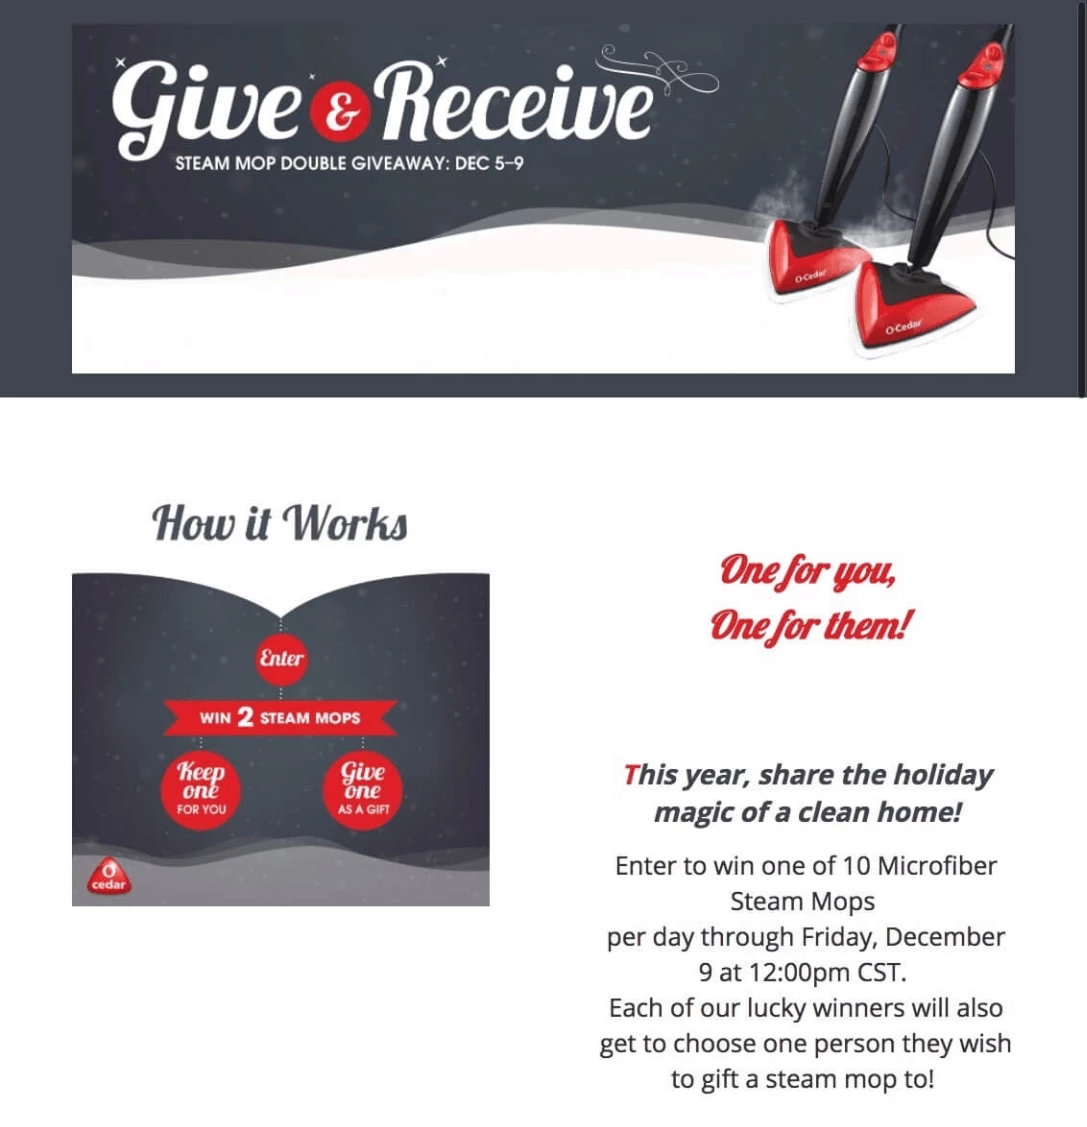 email_giveaway_example3.png